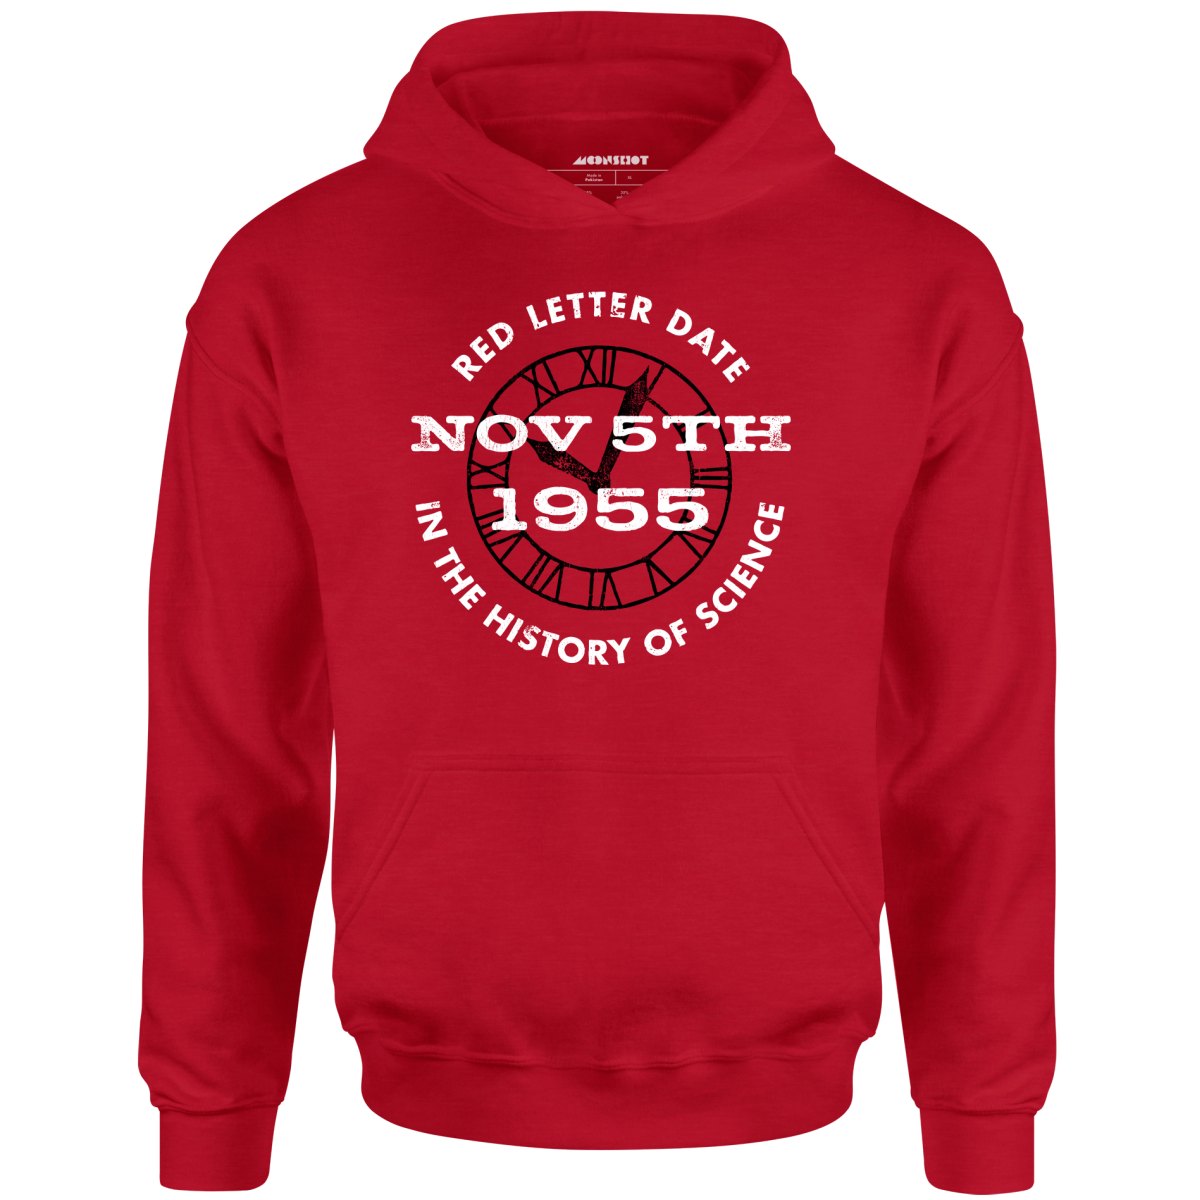 November 5th 1955 - Red Letter Date in the History of Science - Unisex Hoodie